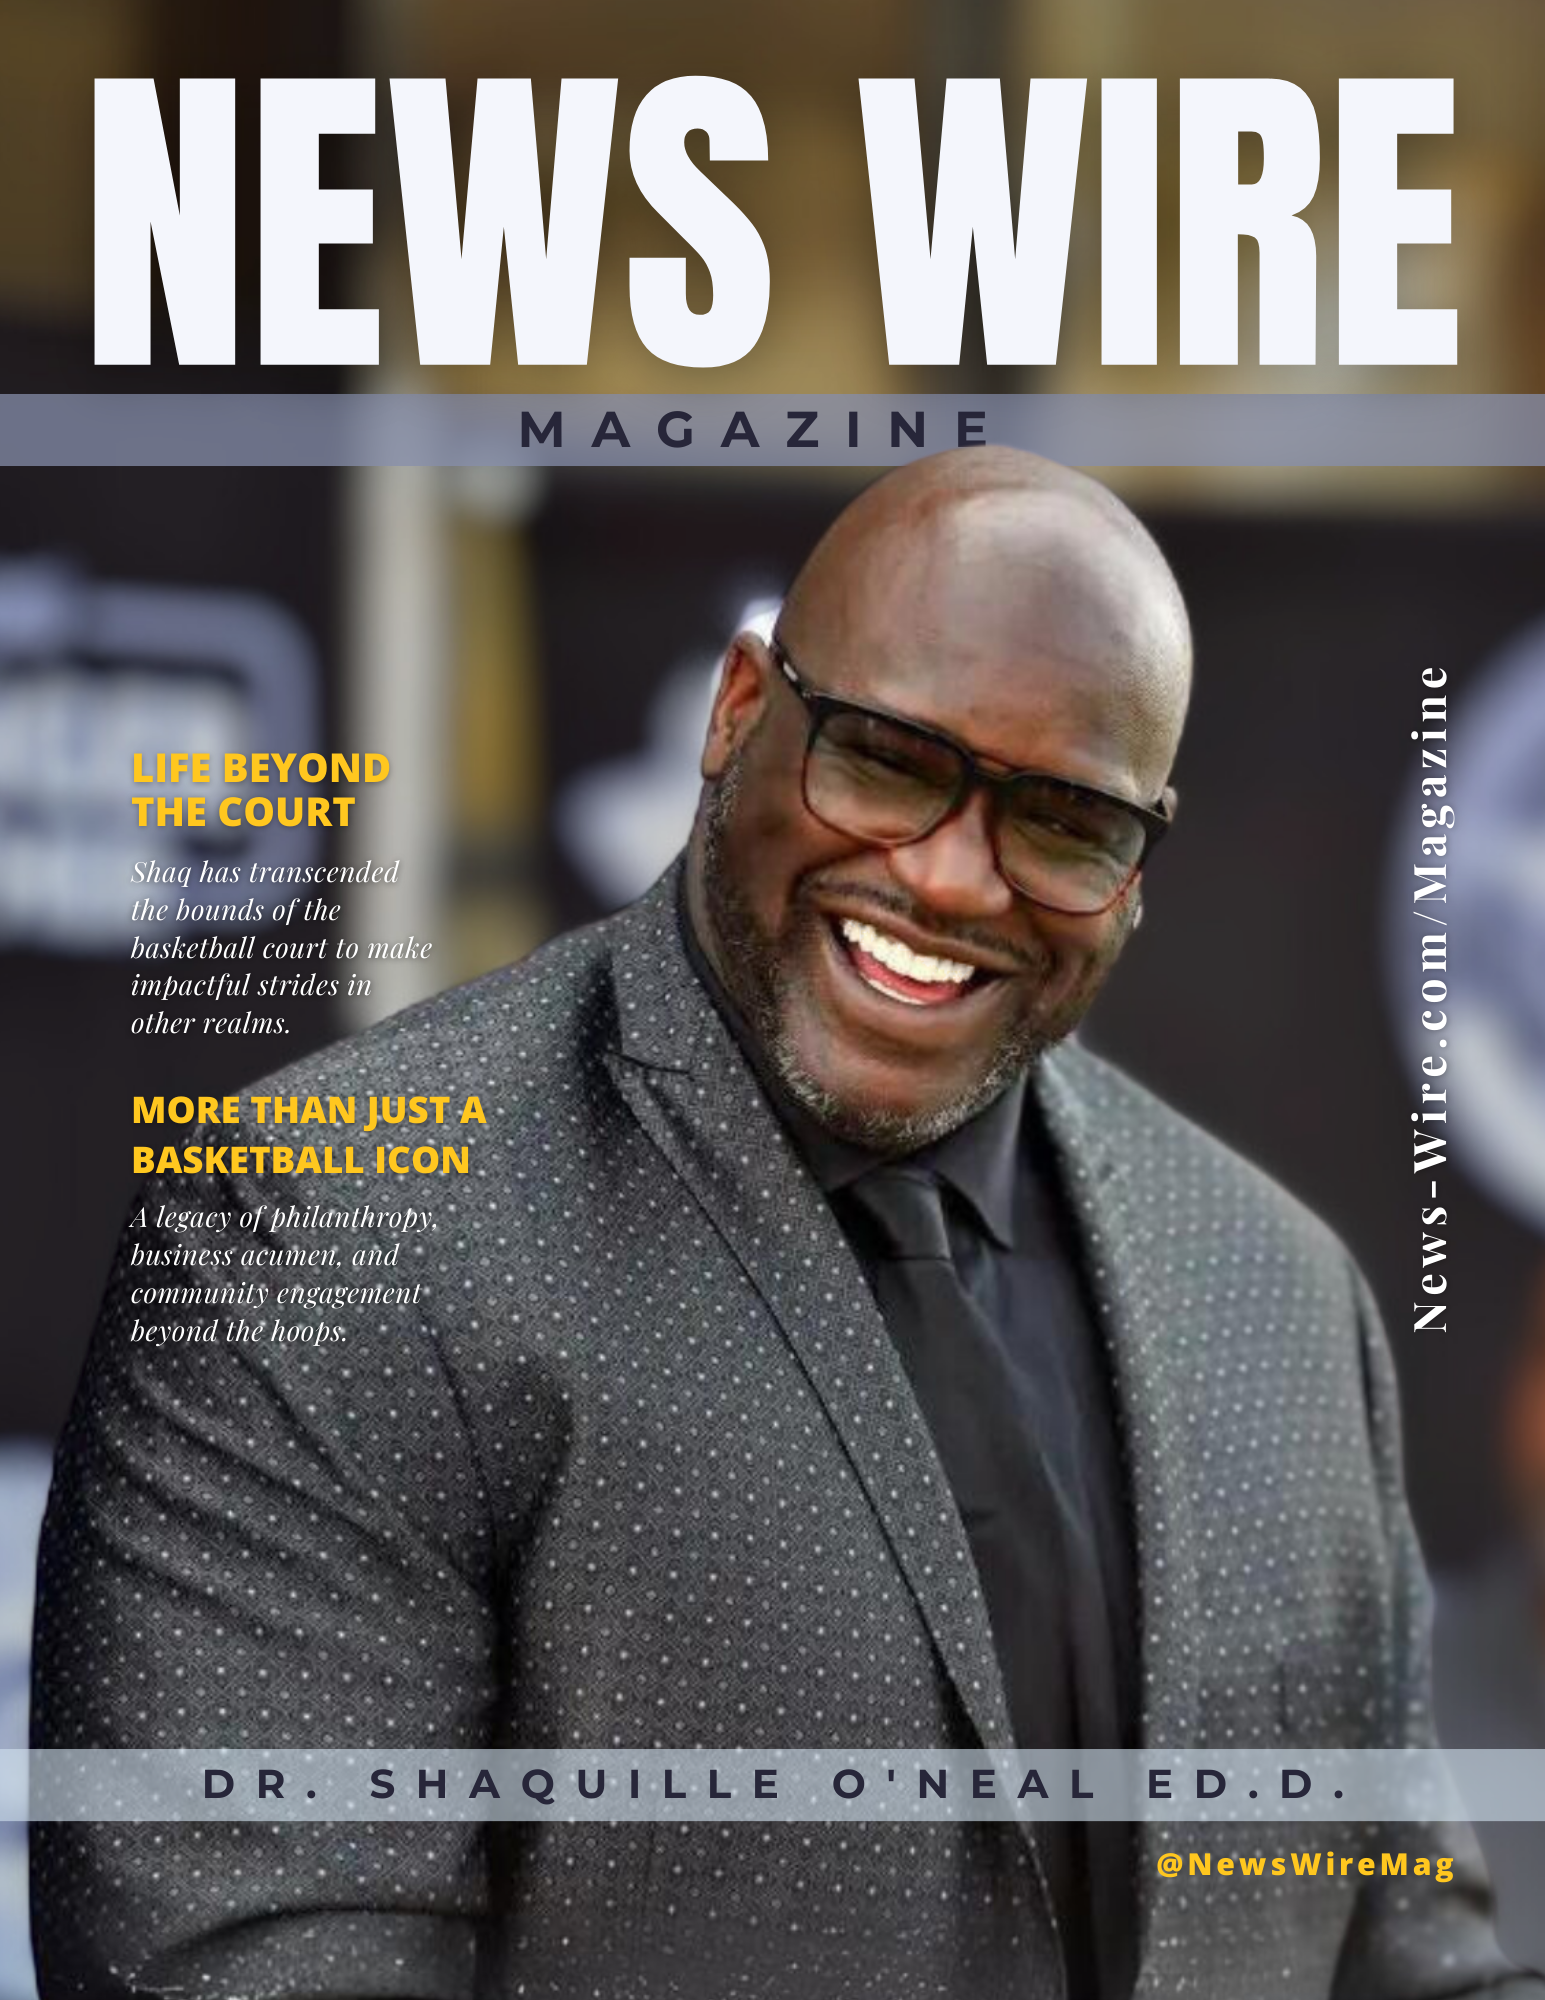 DR. SHAQUILLE O'NEAL Ed.D. - News Wire Magazine Cover